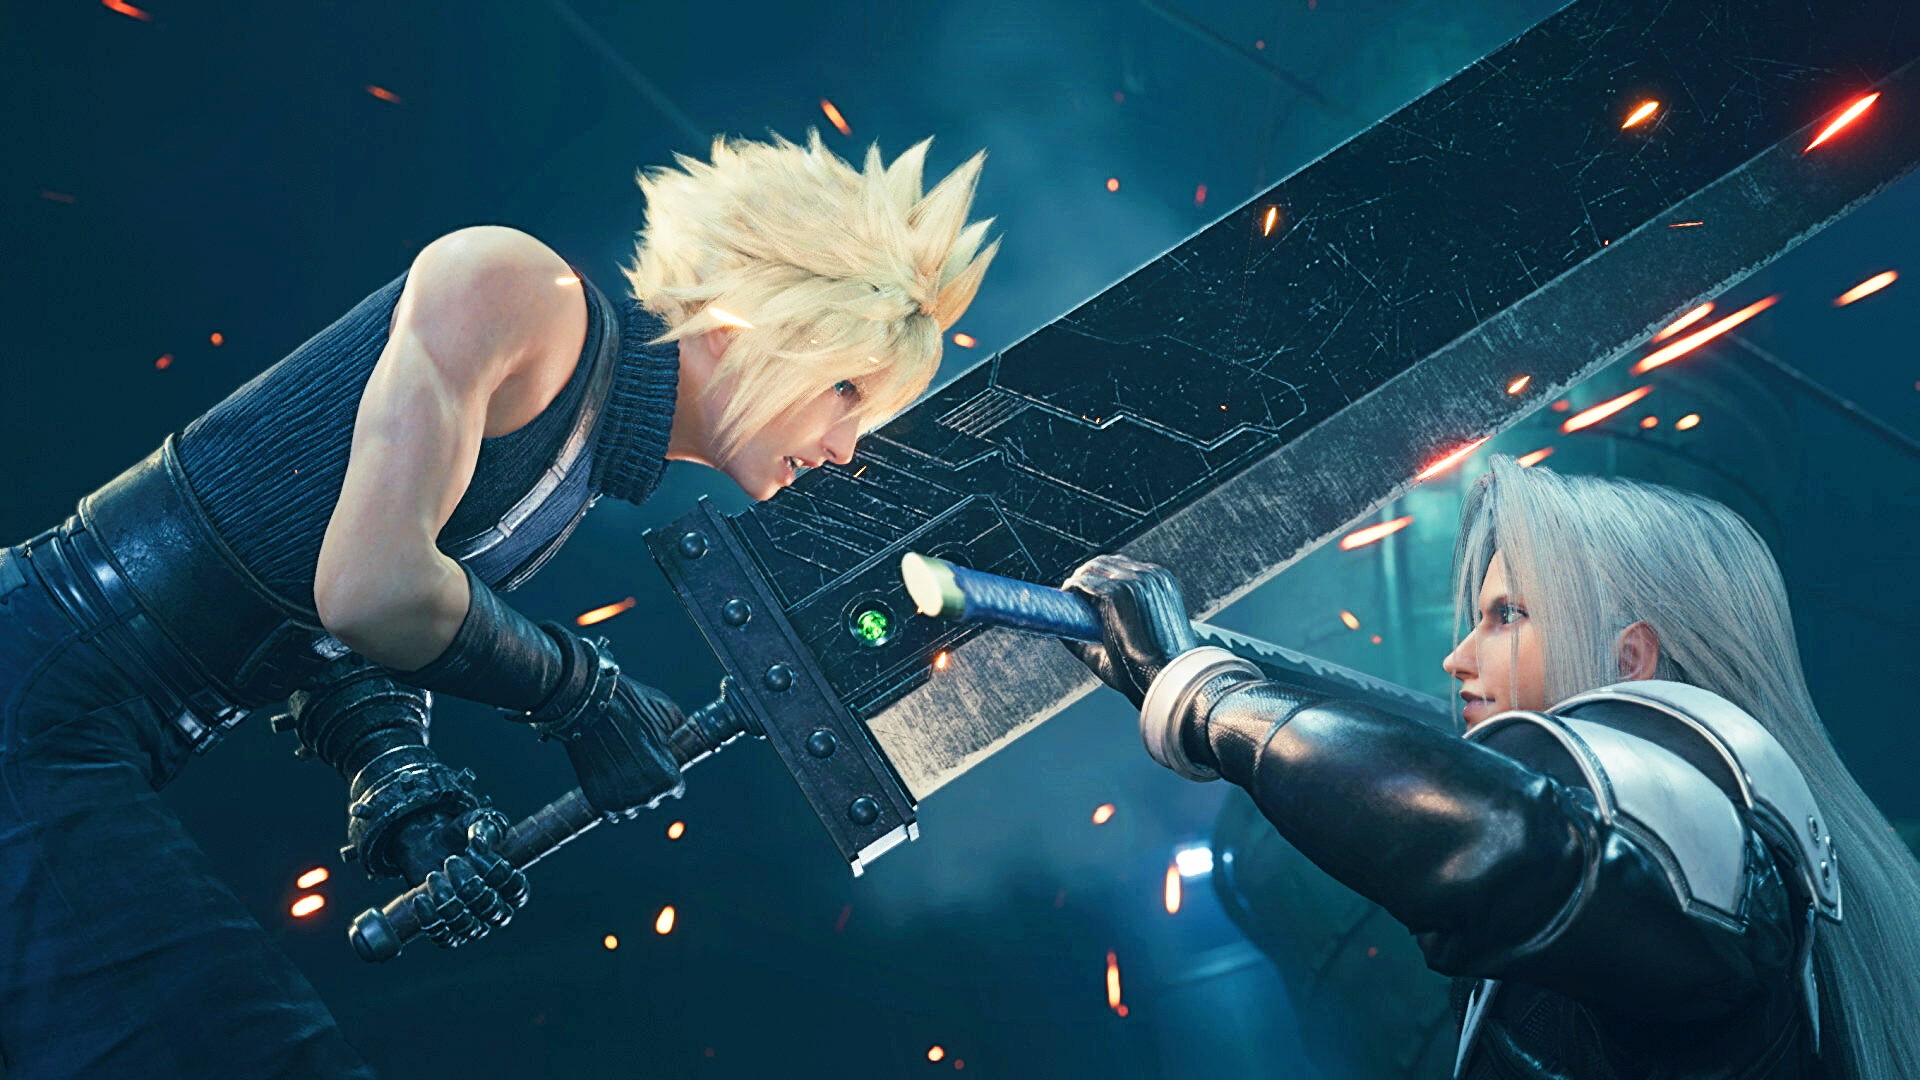 Square Enix is shutting down the Final Fantasy VII battle royale